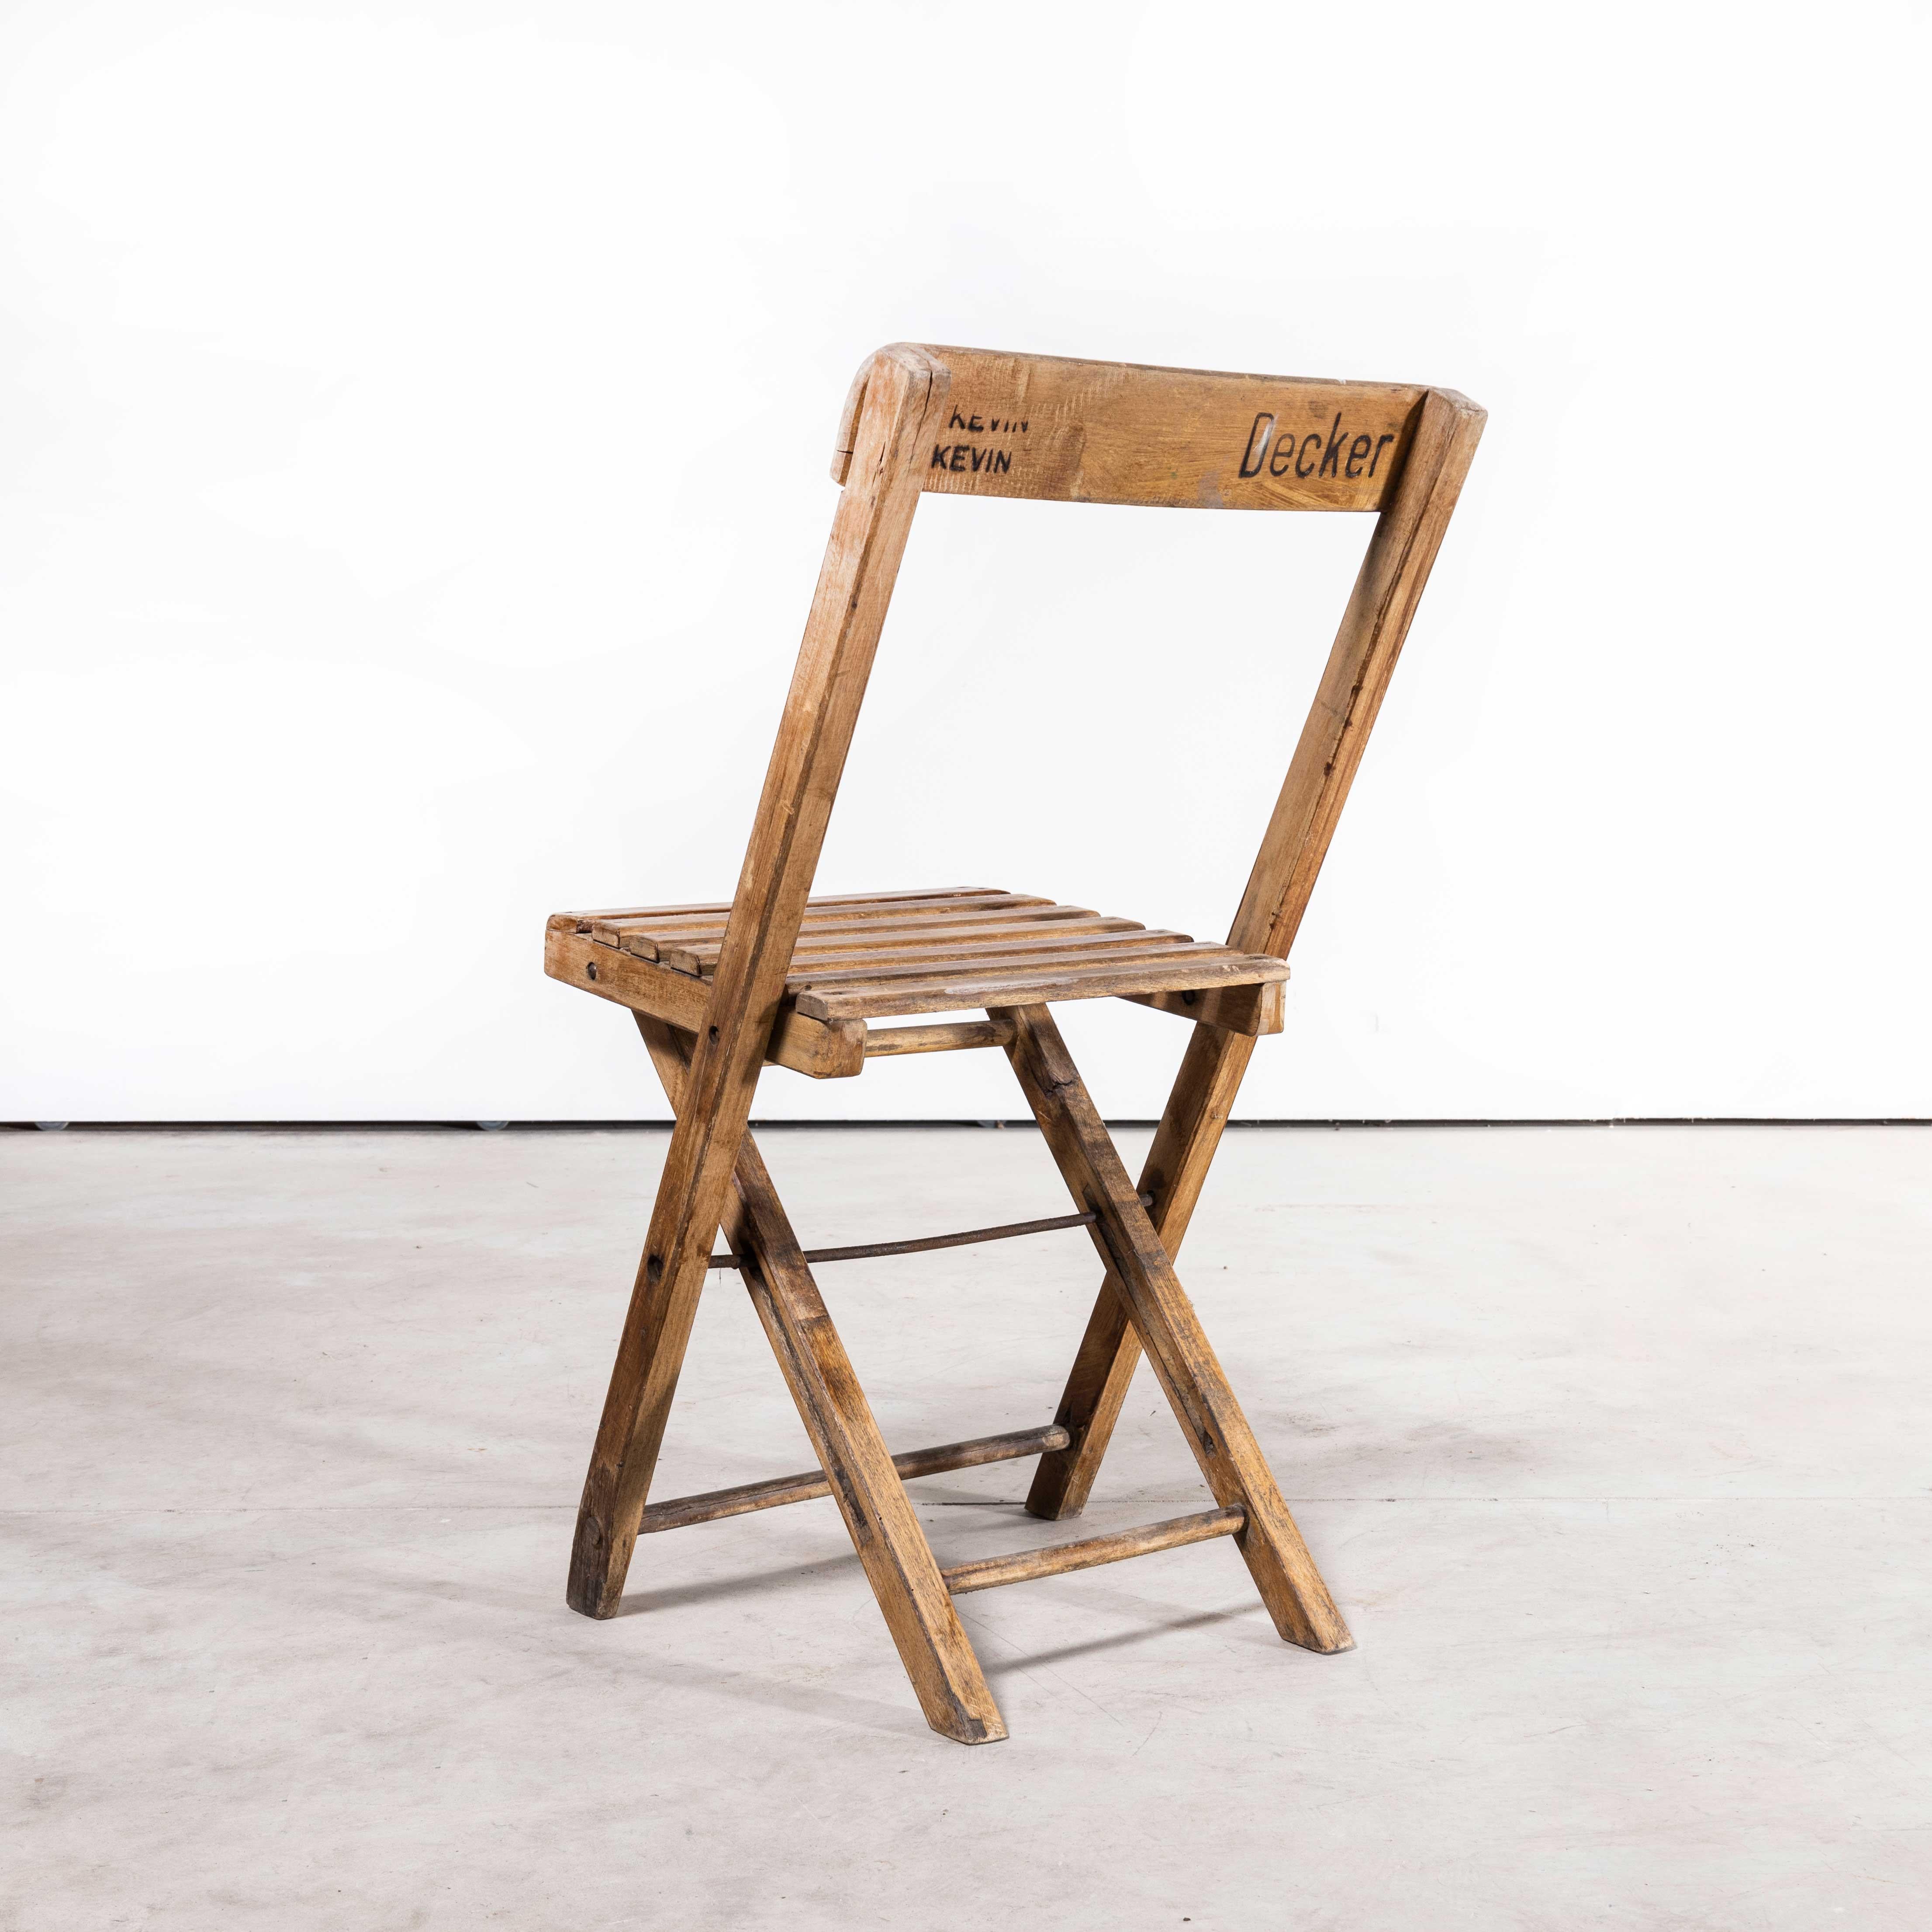 1960s beech folding chairs – various quantities available
1960s beech folding chairs – various quantities available. Good practical Classic folding chairs originally made in germany of solid beech. Every chair passes through our workshops where